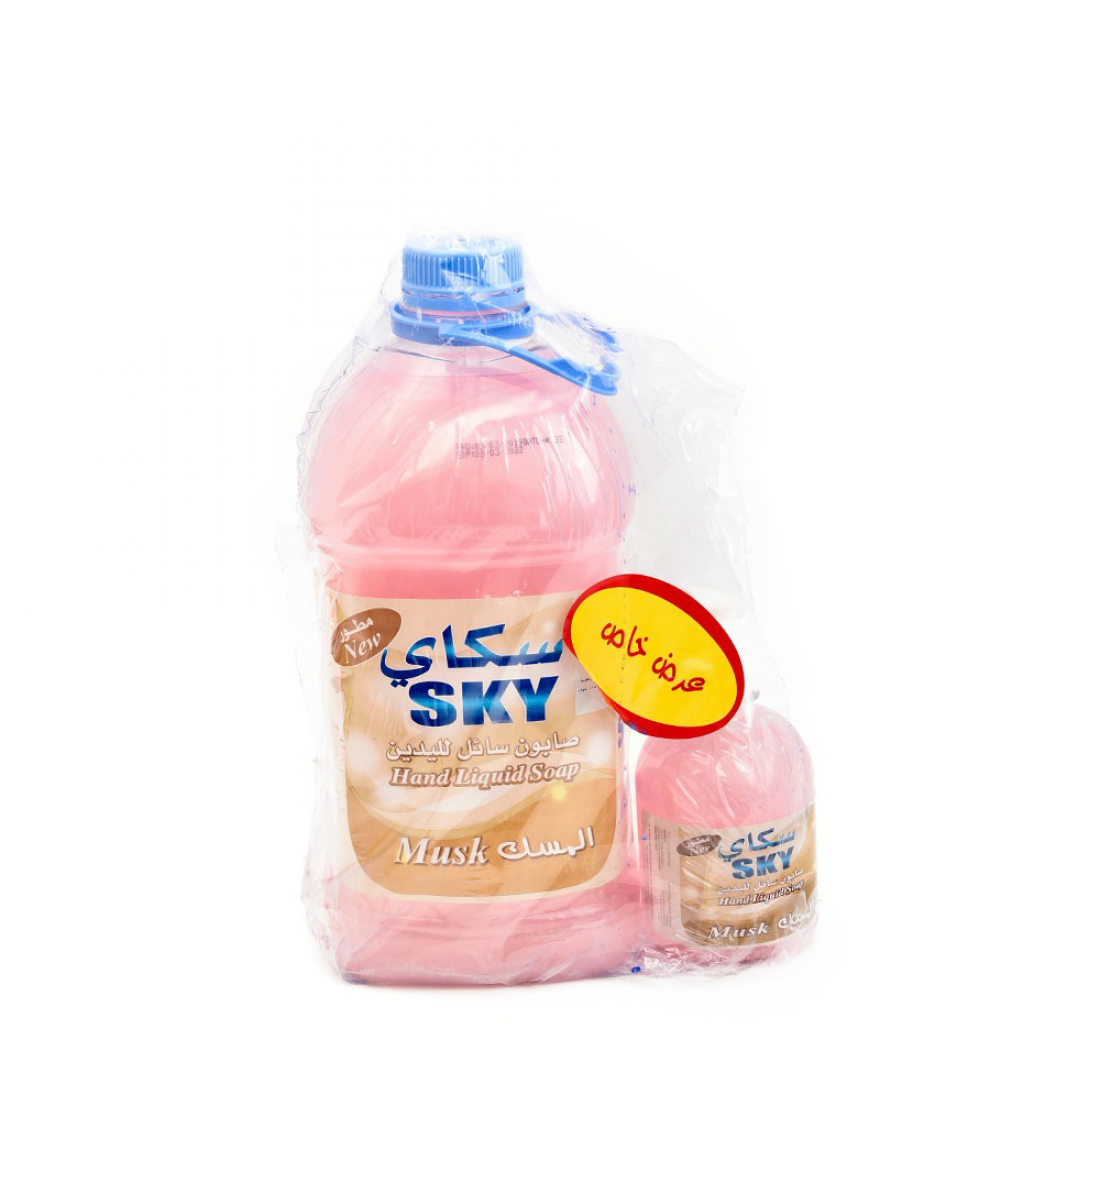 Sky hands soap 3 liter with 400 ml musk scent